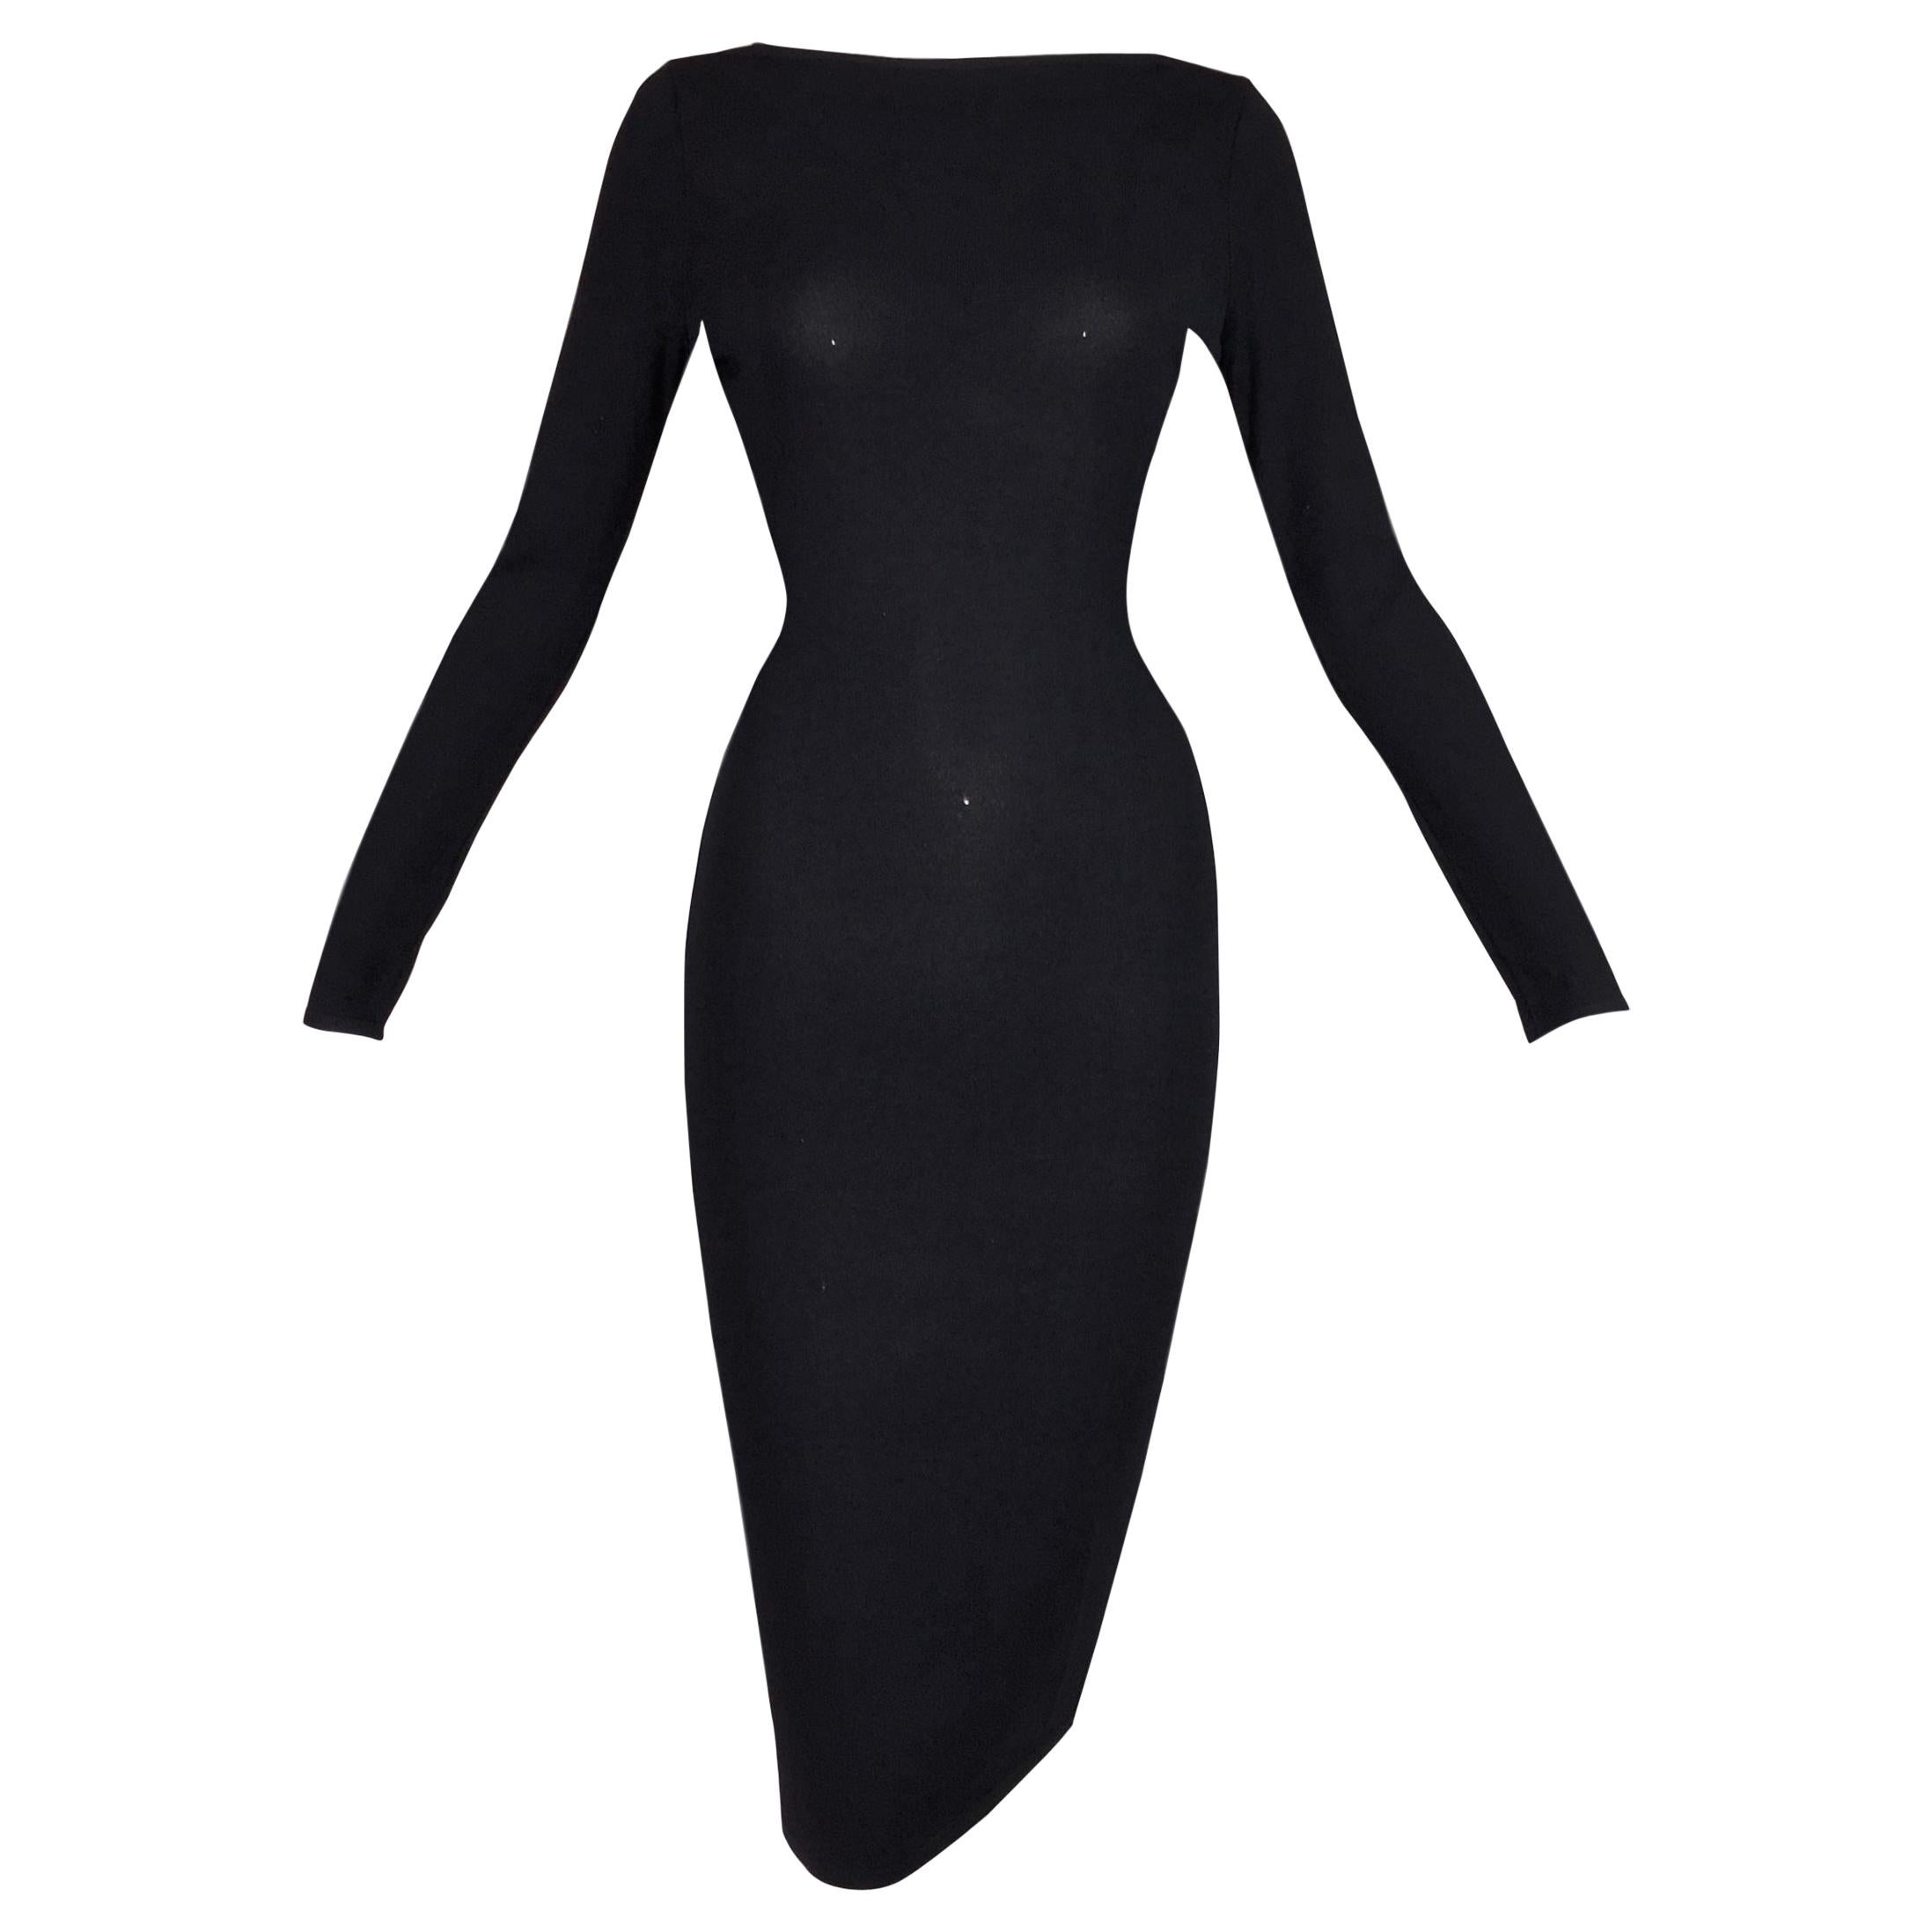 S/S 1998 Gucci by Tom Ford Strappy L/S Black Knit Bodycon Wiggle Dress 40